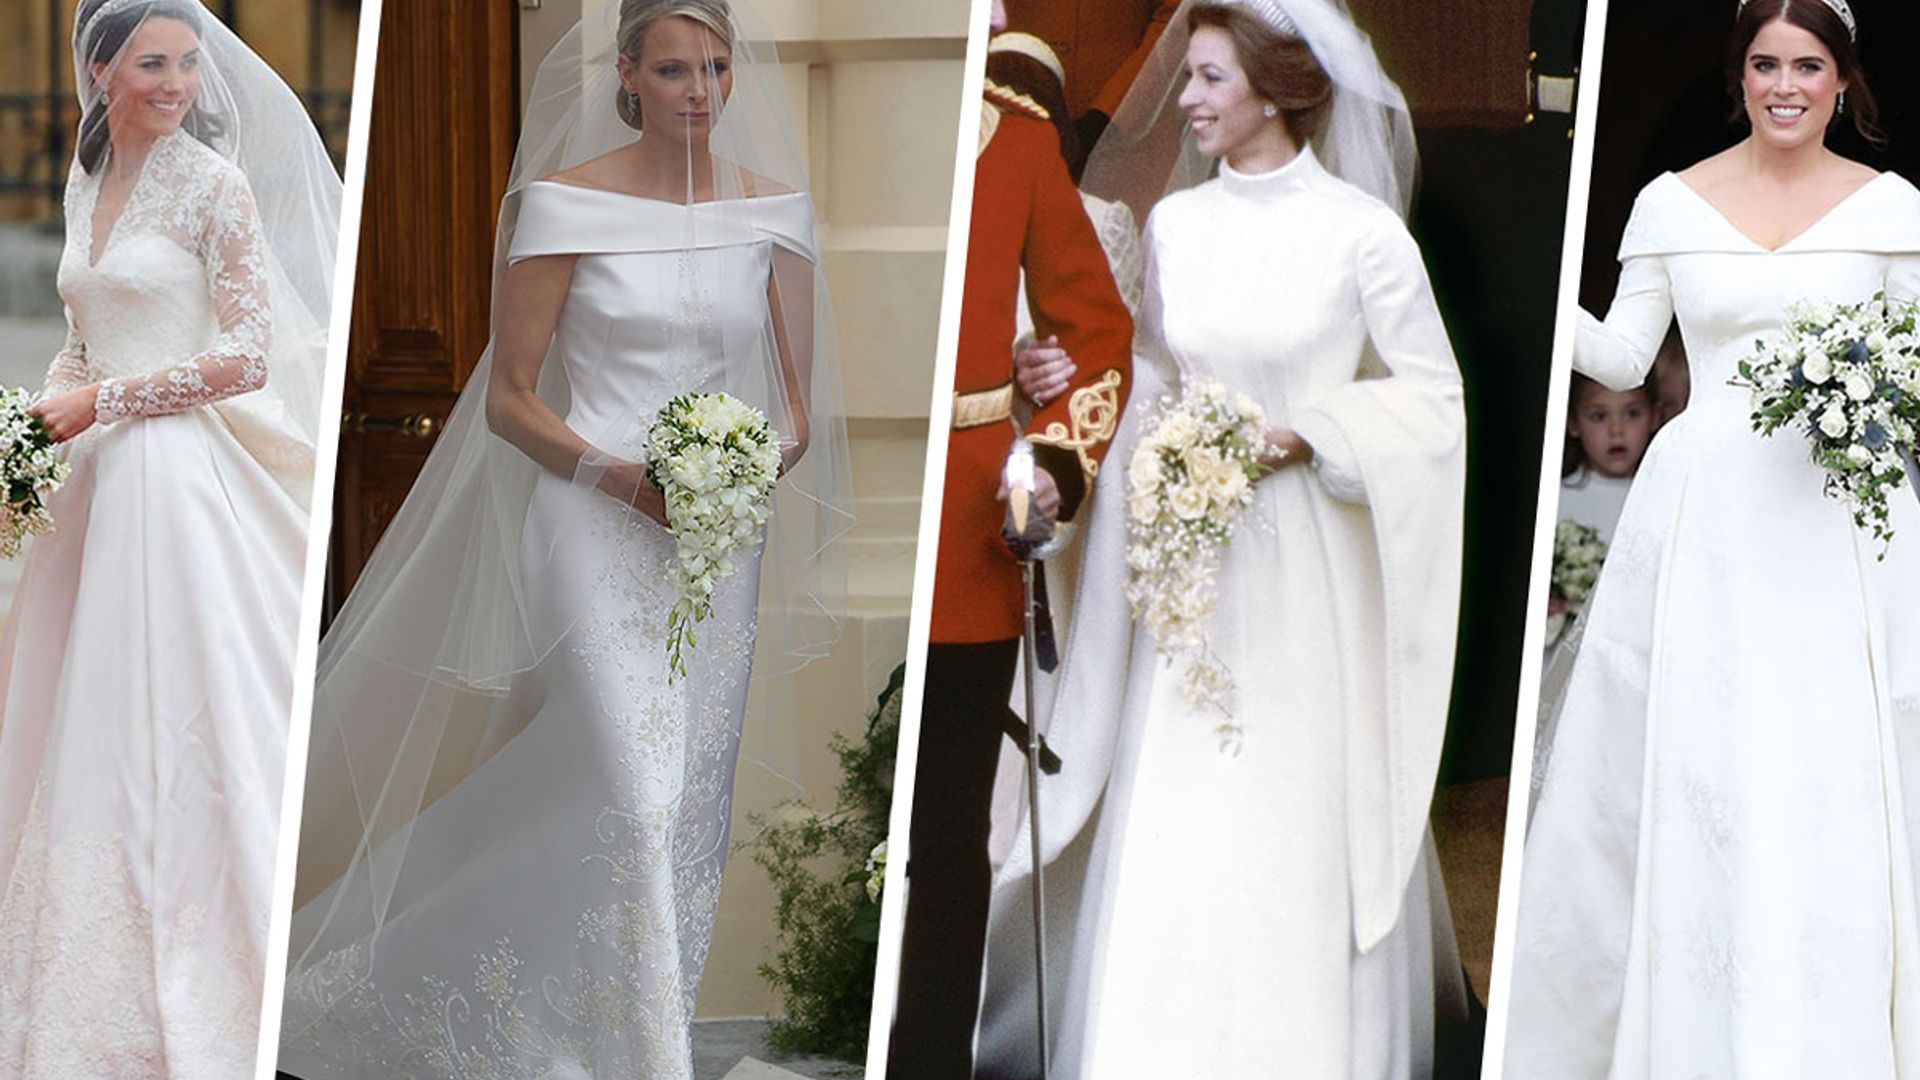 Royal wedding traditions: How Princess Eugenie BROKE the royal rules with  evening dress | Royal | News | Express.co.uk